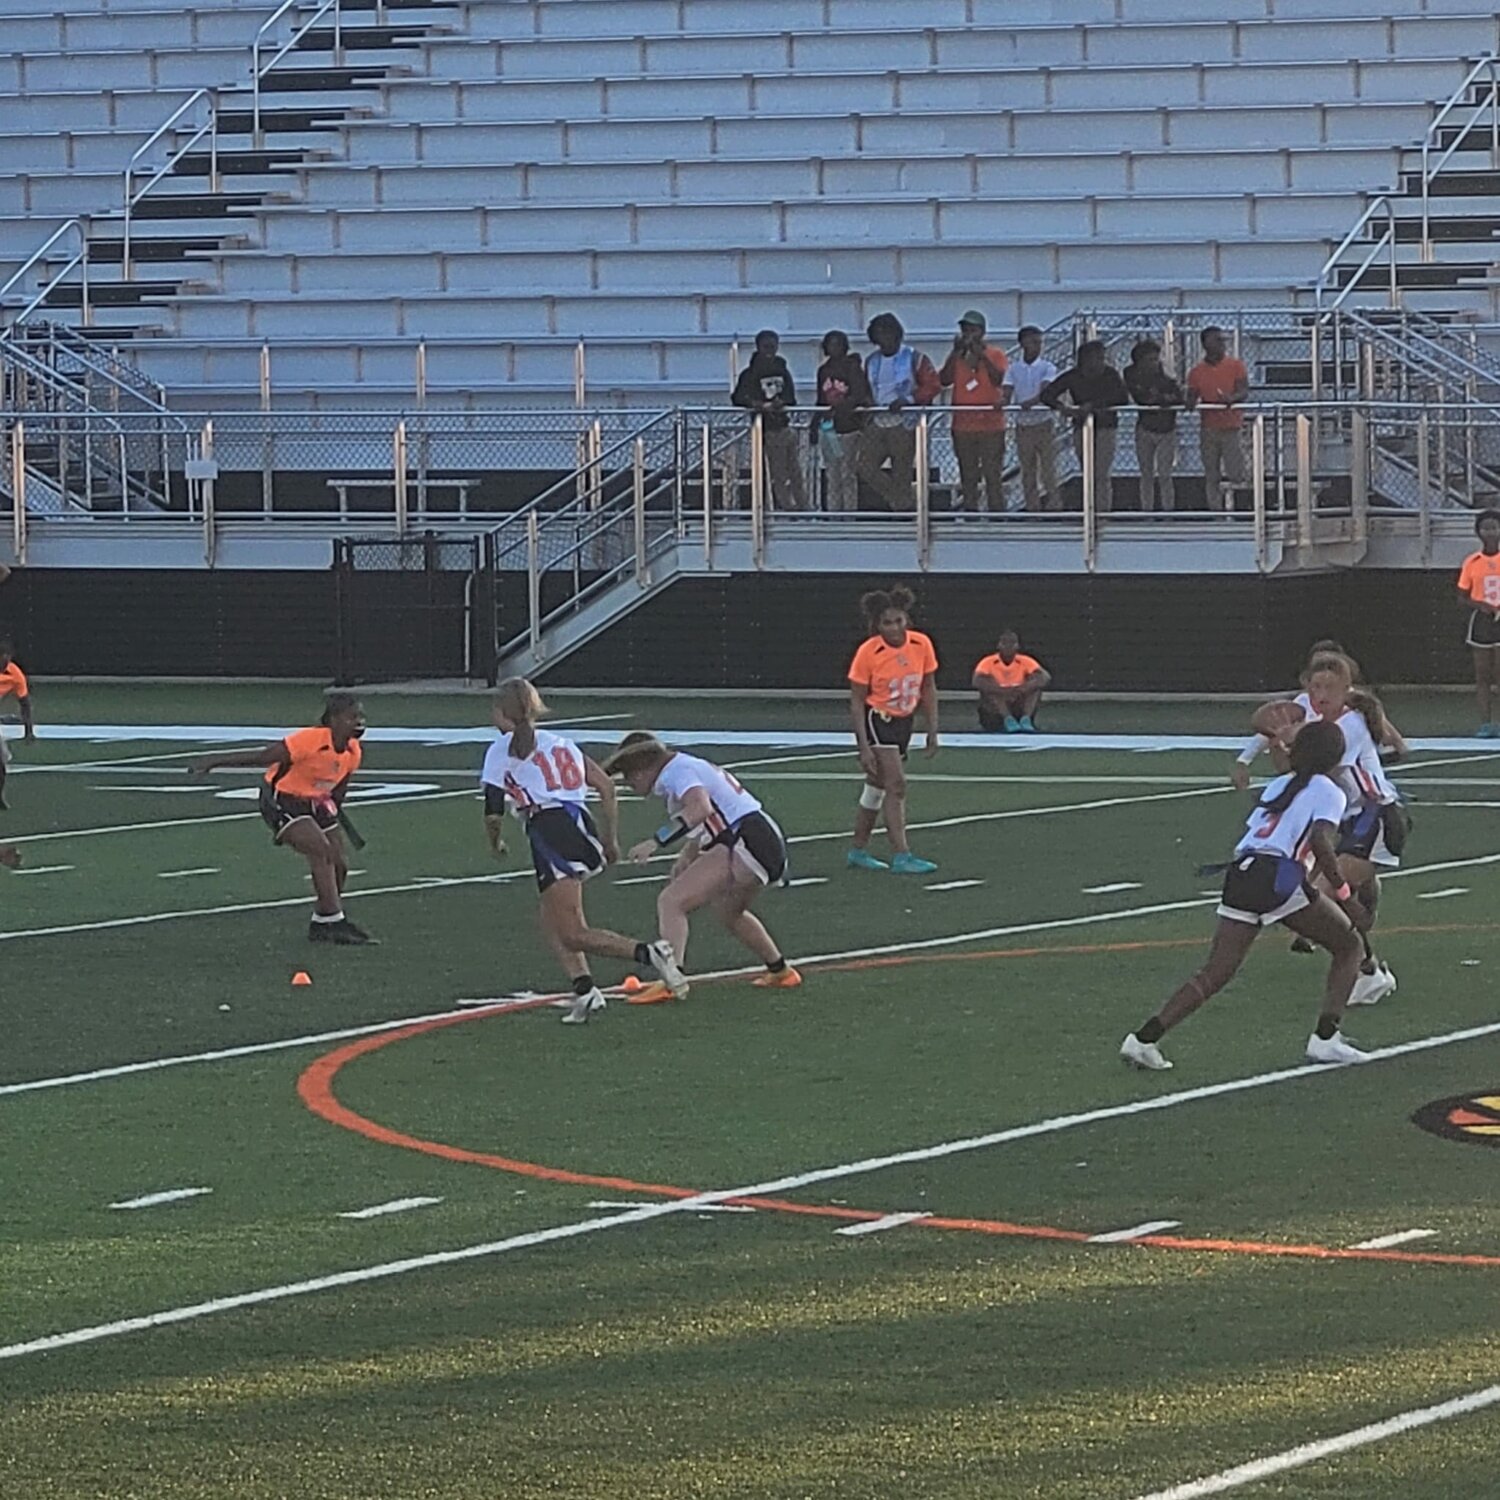 The inaugural flag football season for the Baldwin County Tigers started with a win over the LeFlore Rattlers on Tuesday, Sept. 19. Baldwin County is joined by Daphne in representing the county in the pilot season of girls’ flag football before AHSAA championship play begins in 2024.